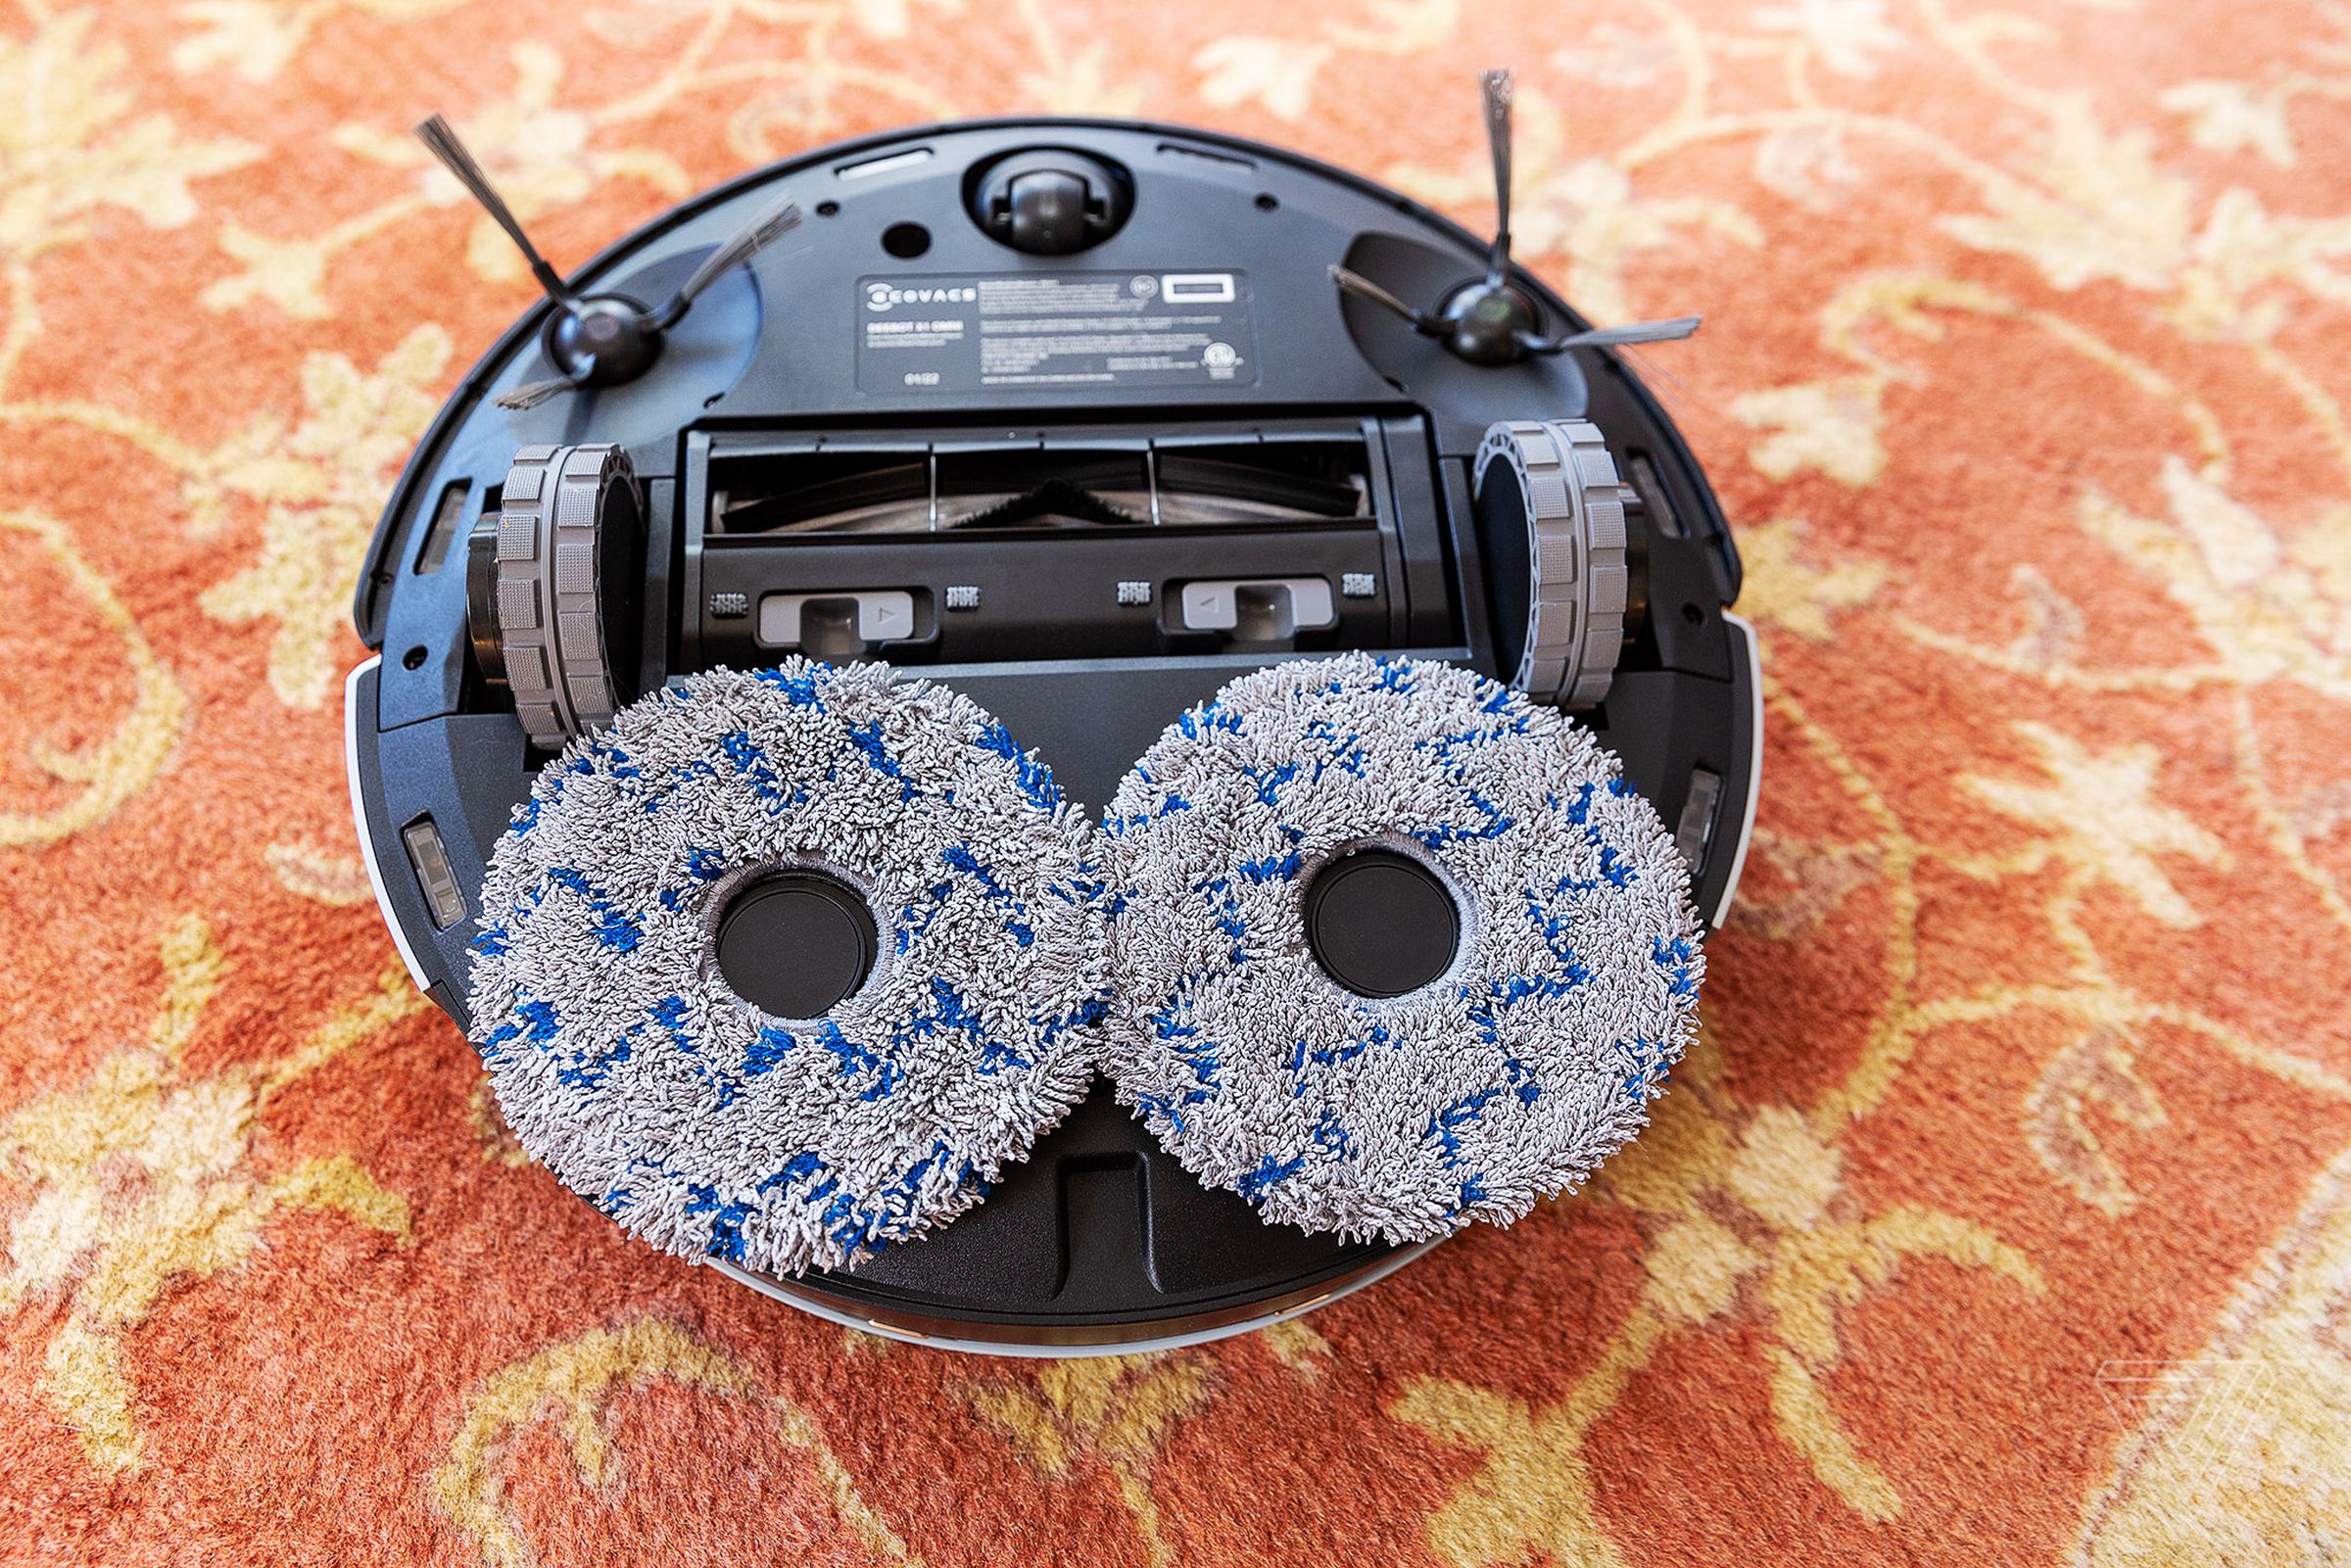 Two removable, washable mopping pads help the X1 Omni keep your floors sparklingly clean.